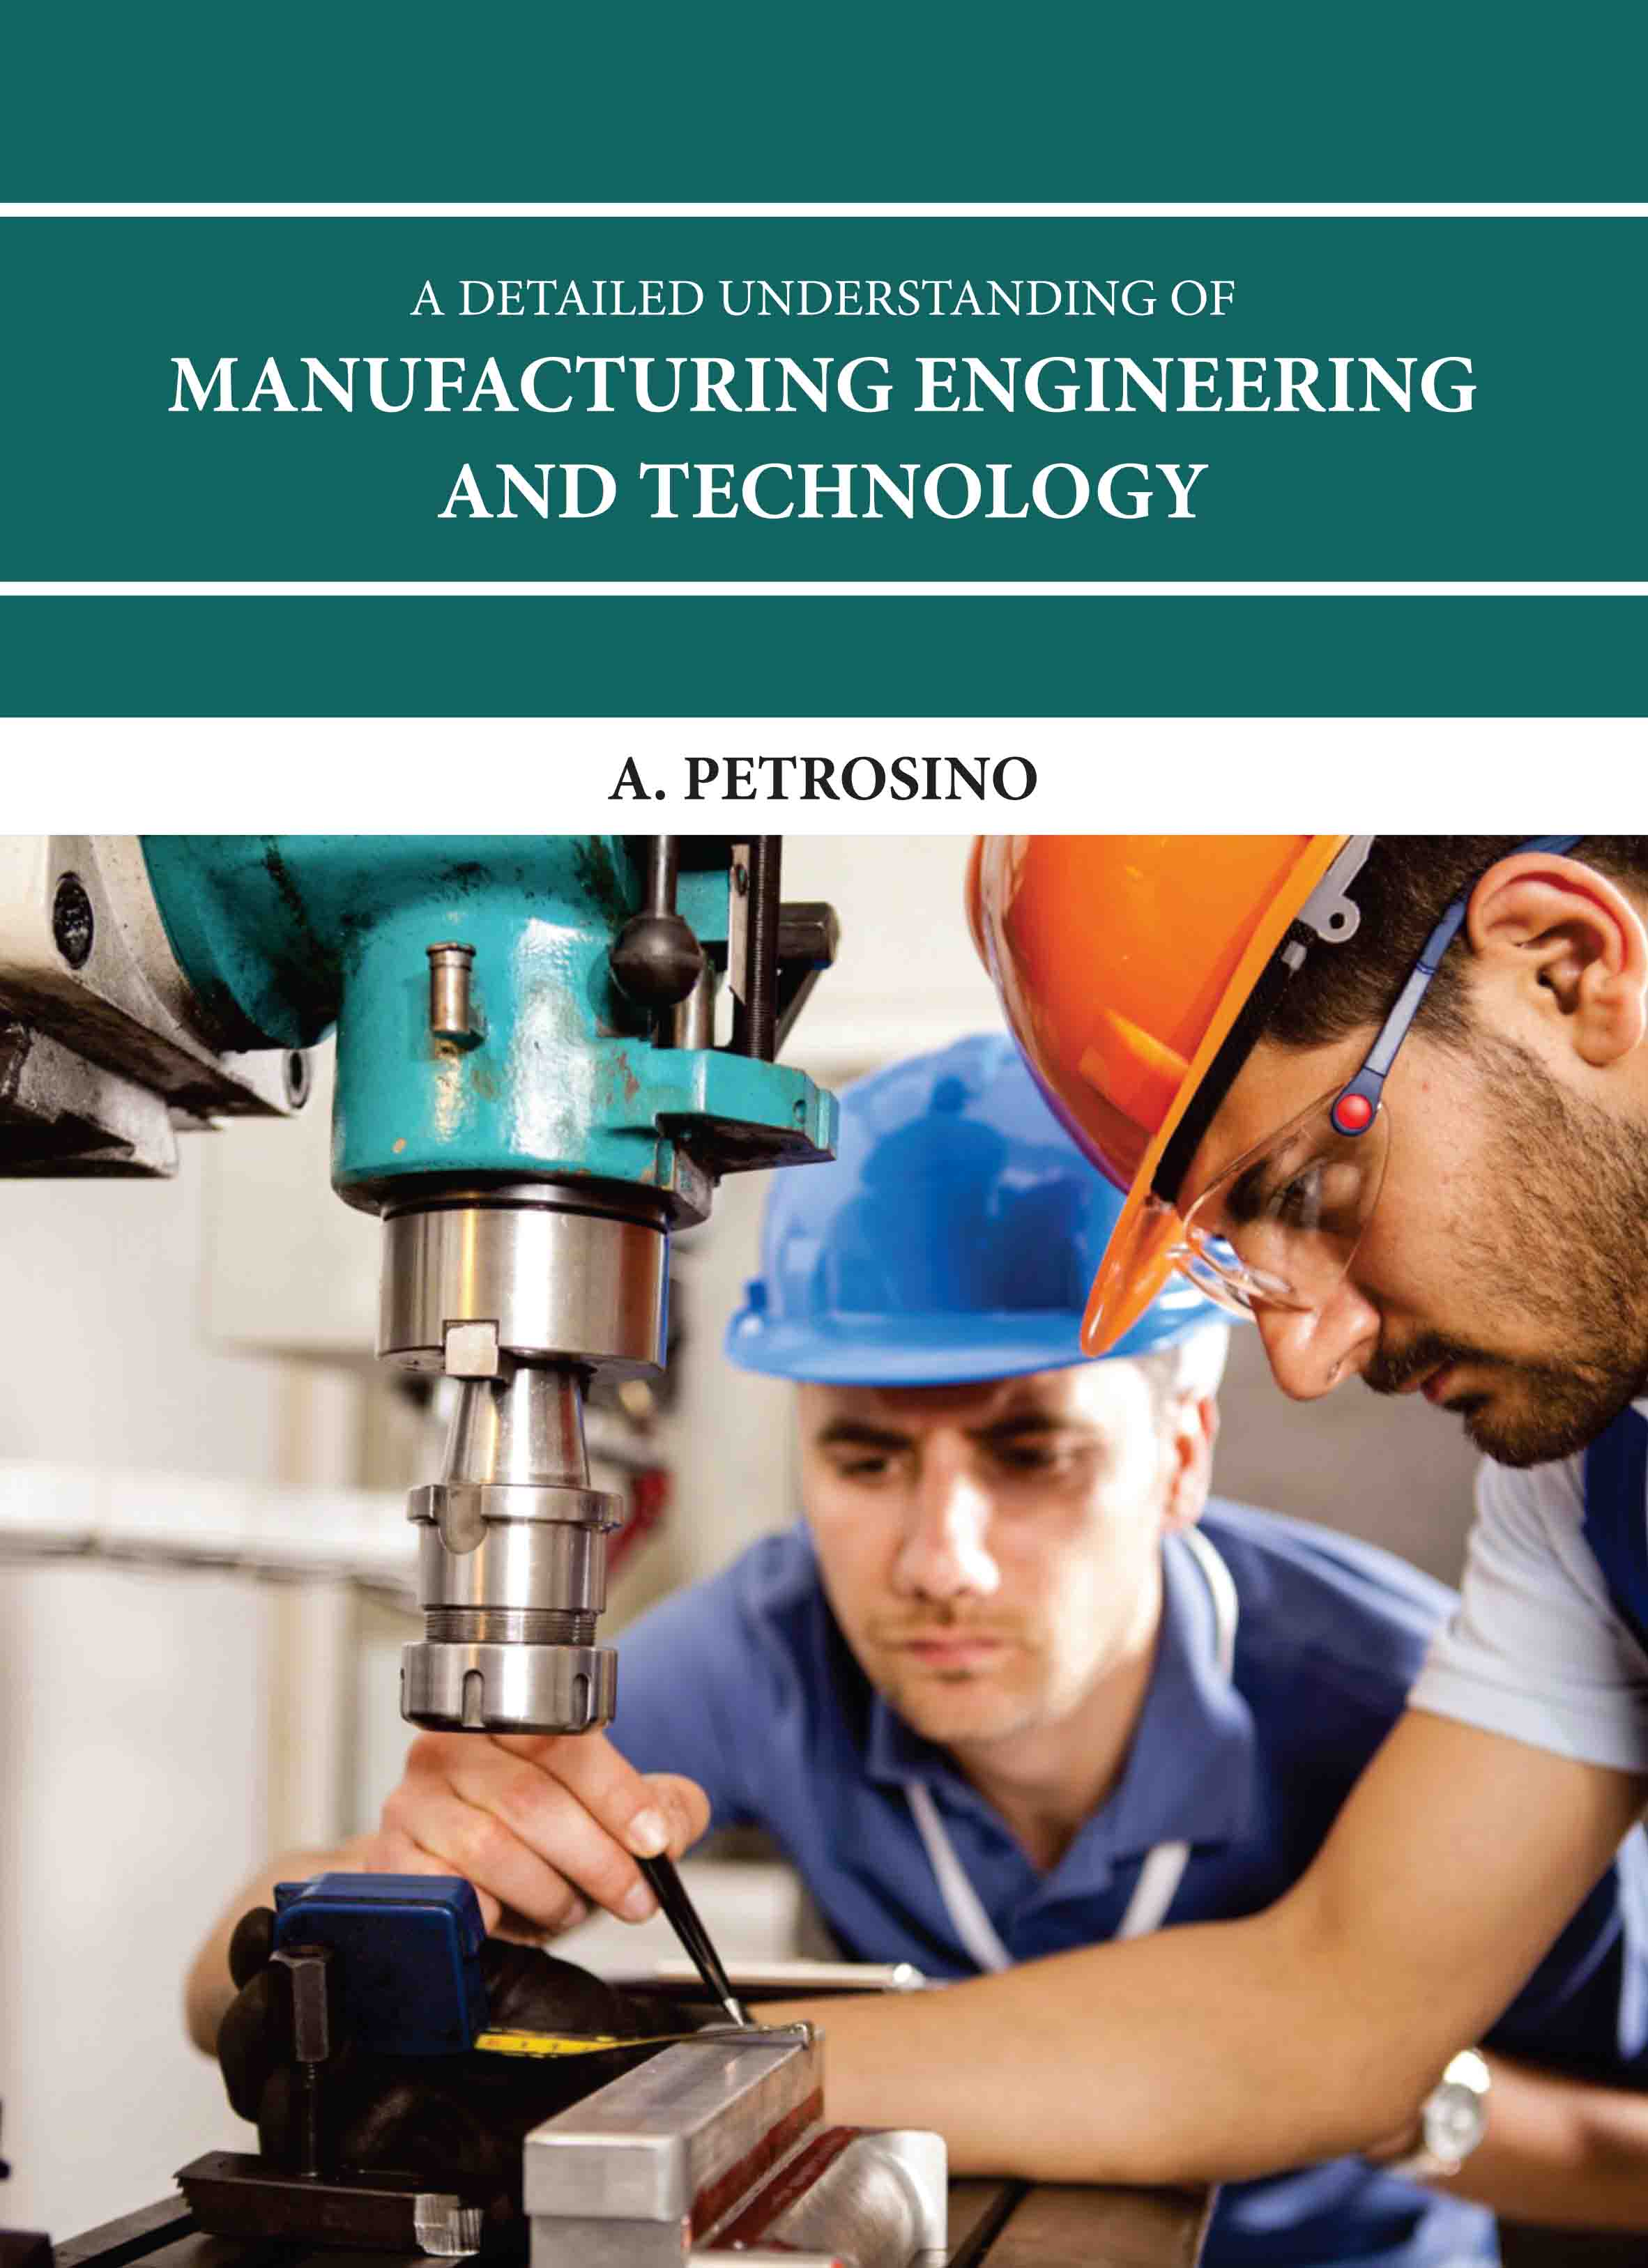 A Detailed Understanding of Manufacturing Engineering and Technology